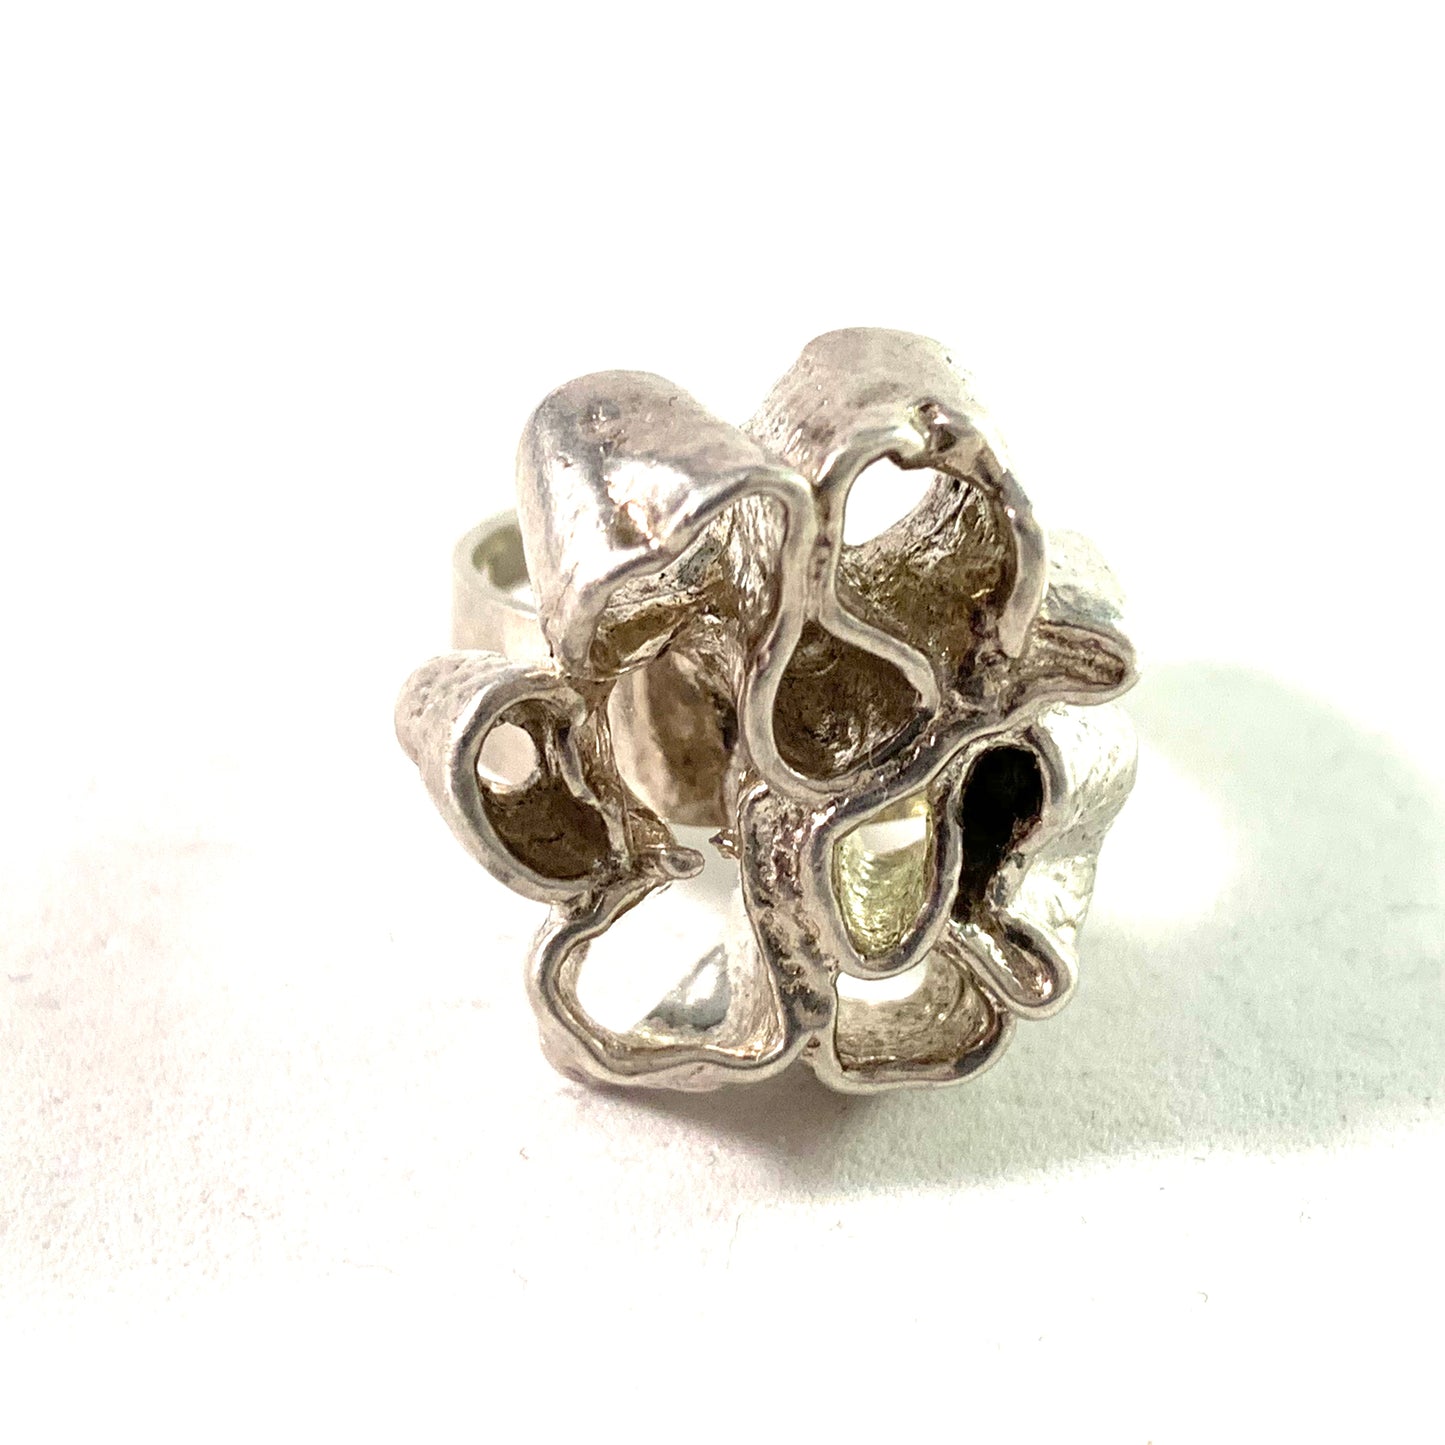 Stockholm year 1970 Modernist Abstract Sterling Silver Ring. Signed